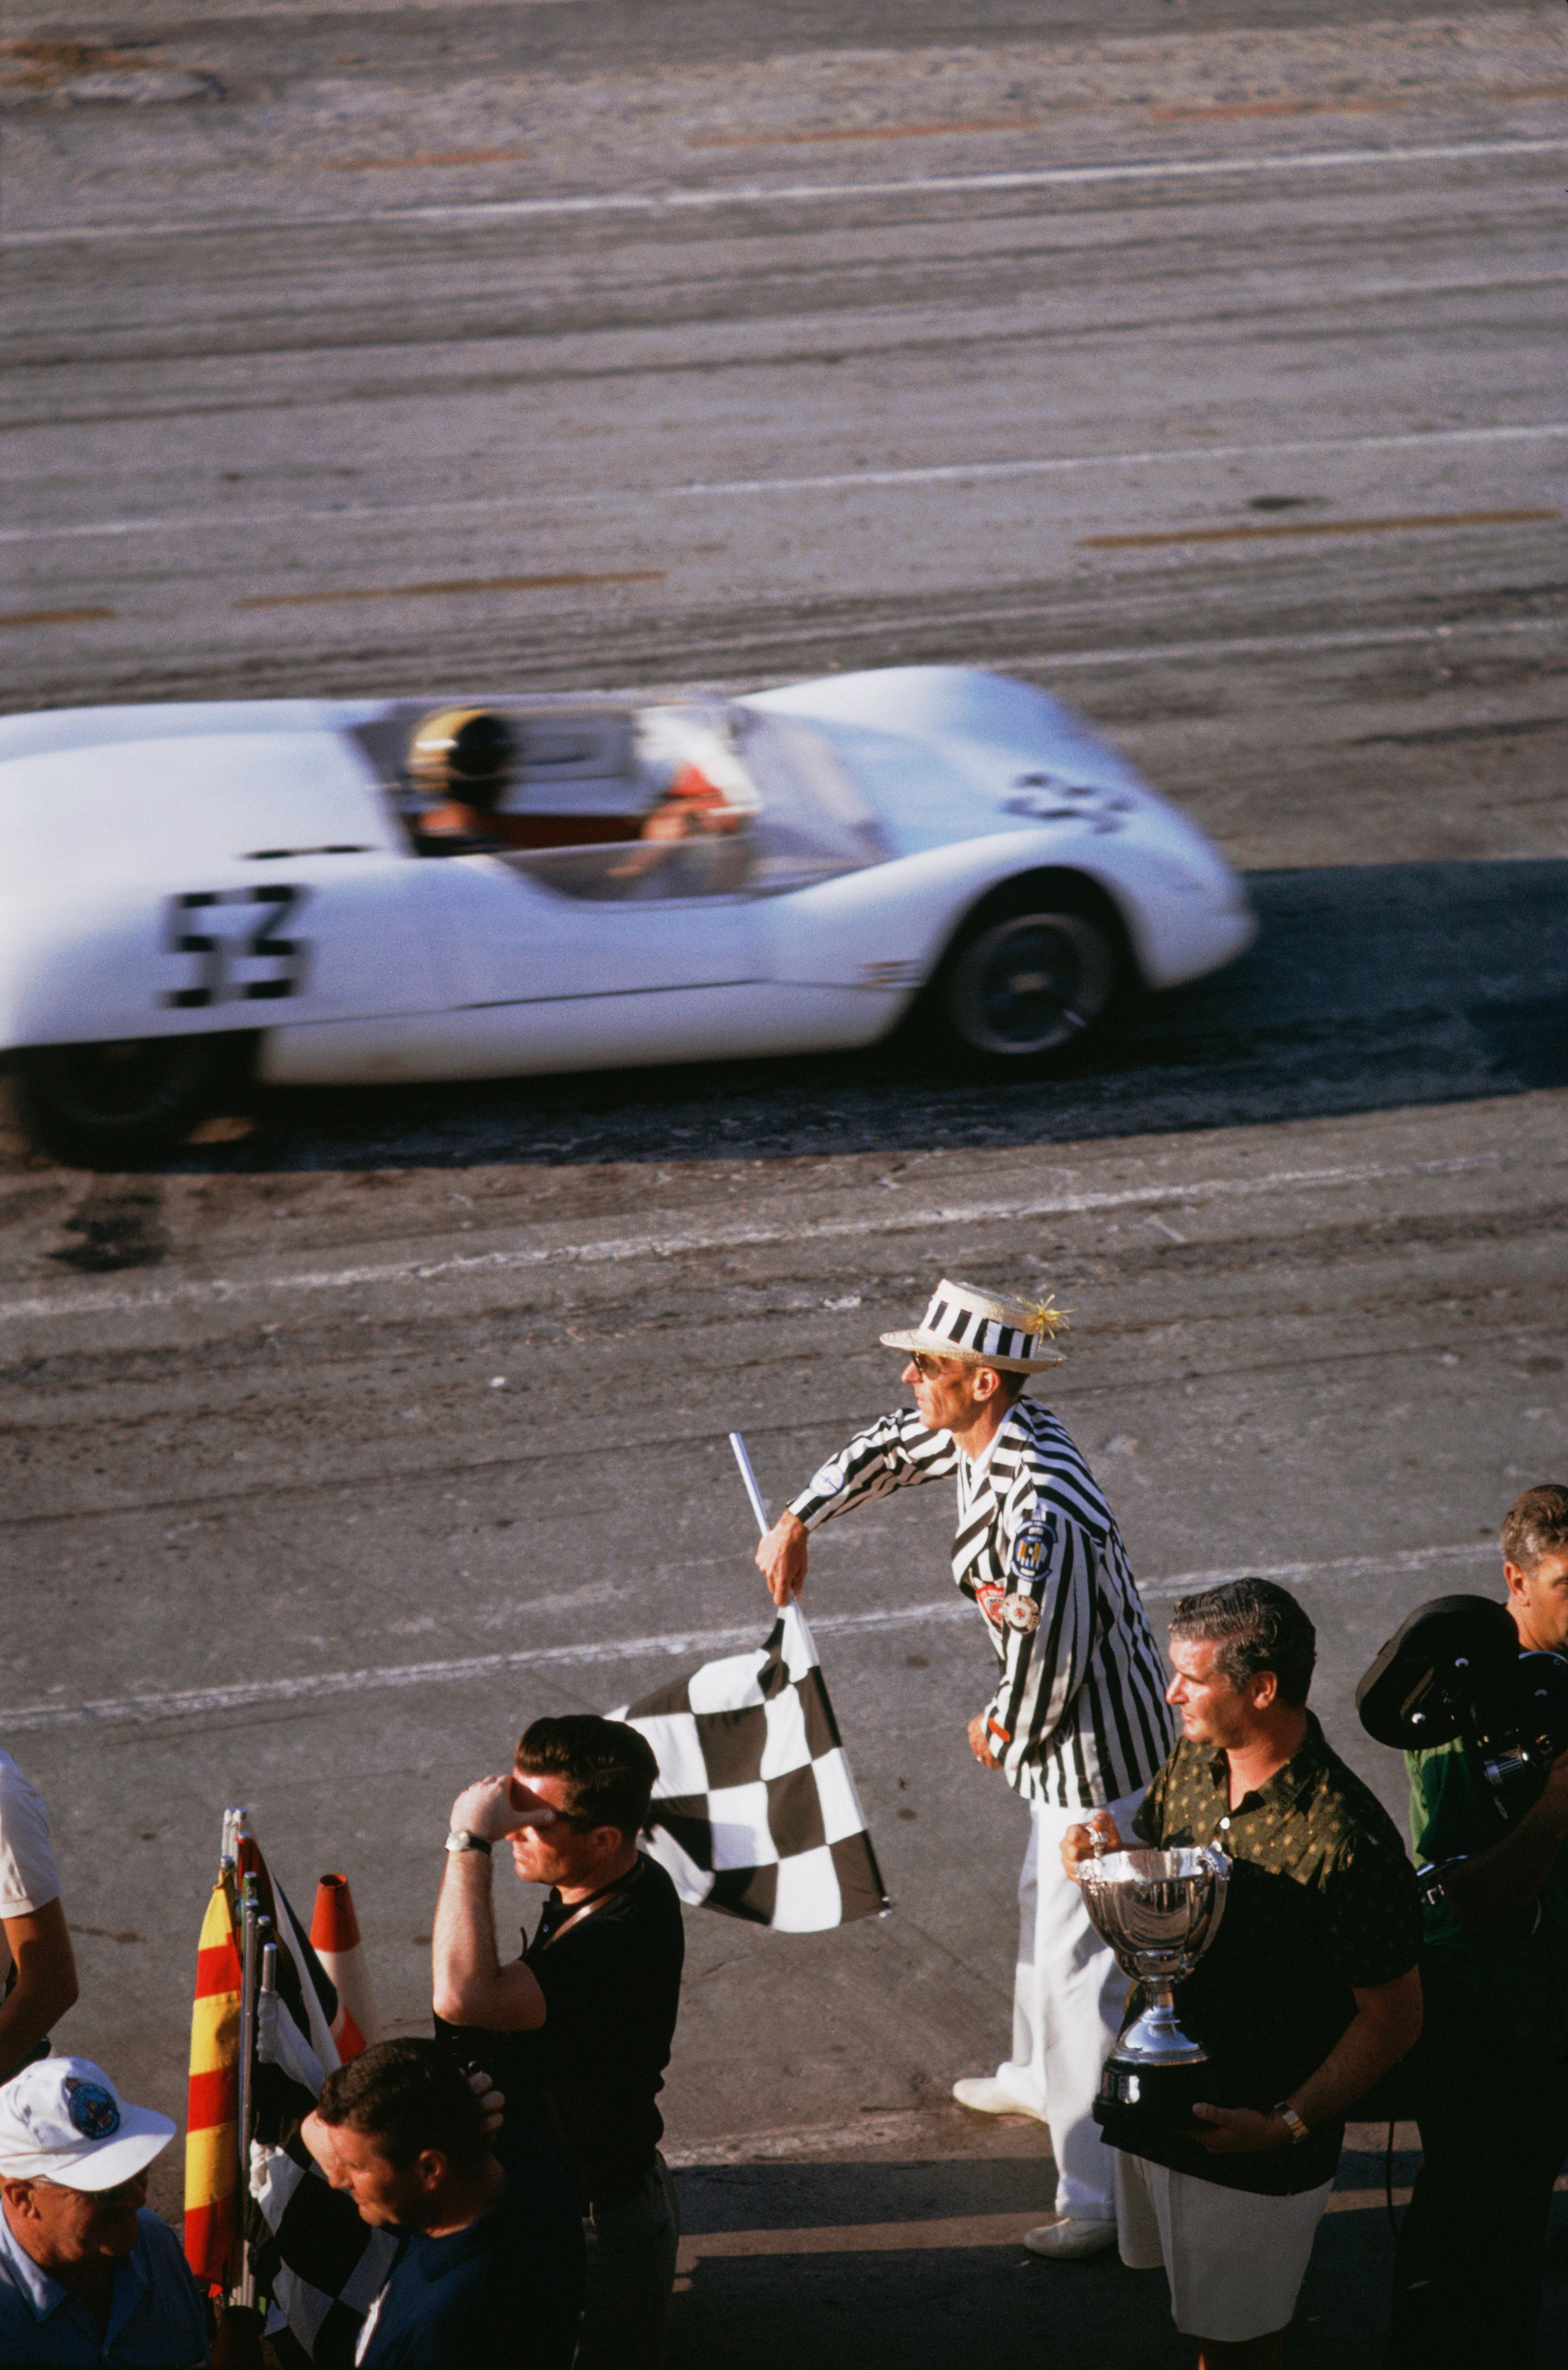 'Checkered Flag' 1963 Slim Aarons Limited Estate Edition
The checkered flag signals the end of the race during the 1963 Nassau Speed Week. 

Slim Aarons Chromogenic C print 
Printed Later 
Slim Aarons Estate Edition 
Produced utilising the only